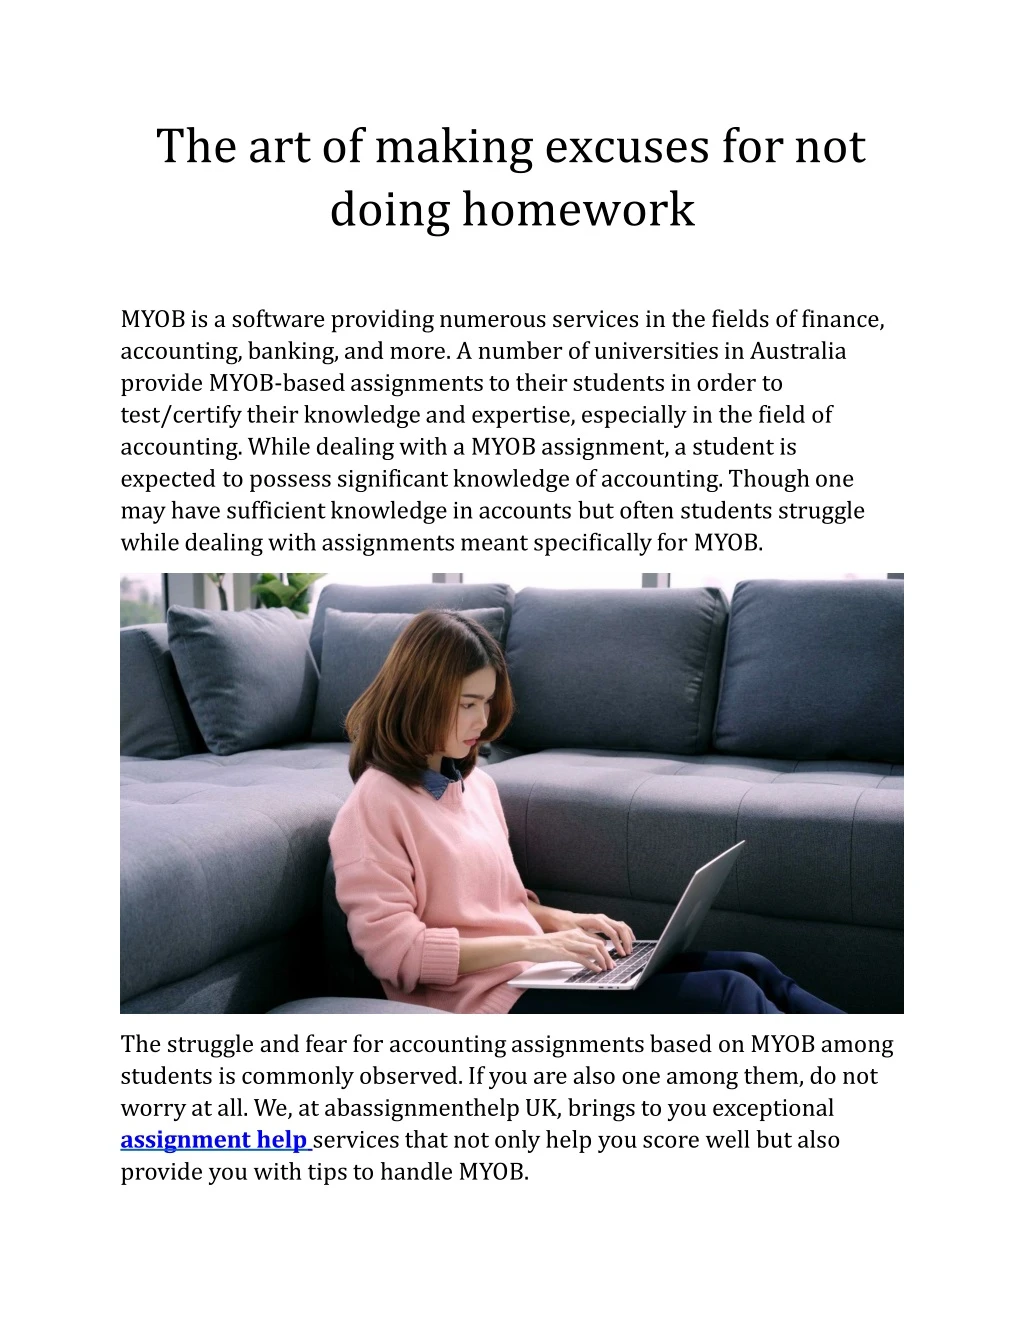 the art of making excuses for not doing homework